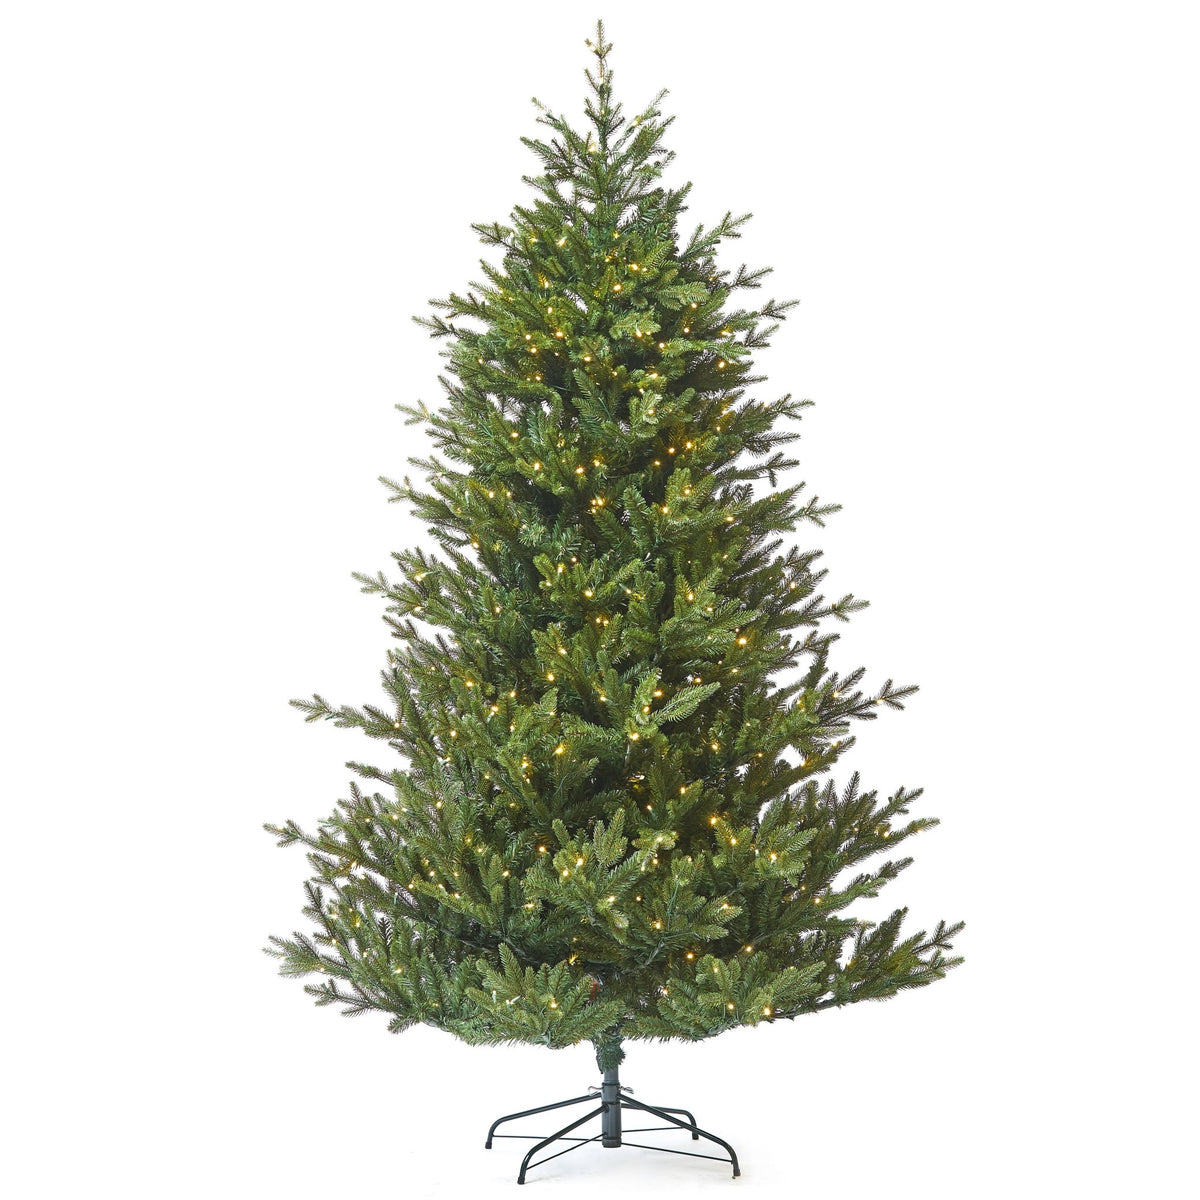 10ft Frosted Asheville Fraser Fir Tree w/ WW LED Lights - Holiday Warehouse